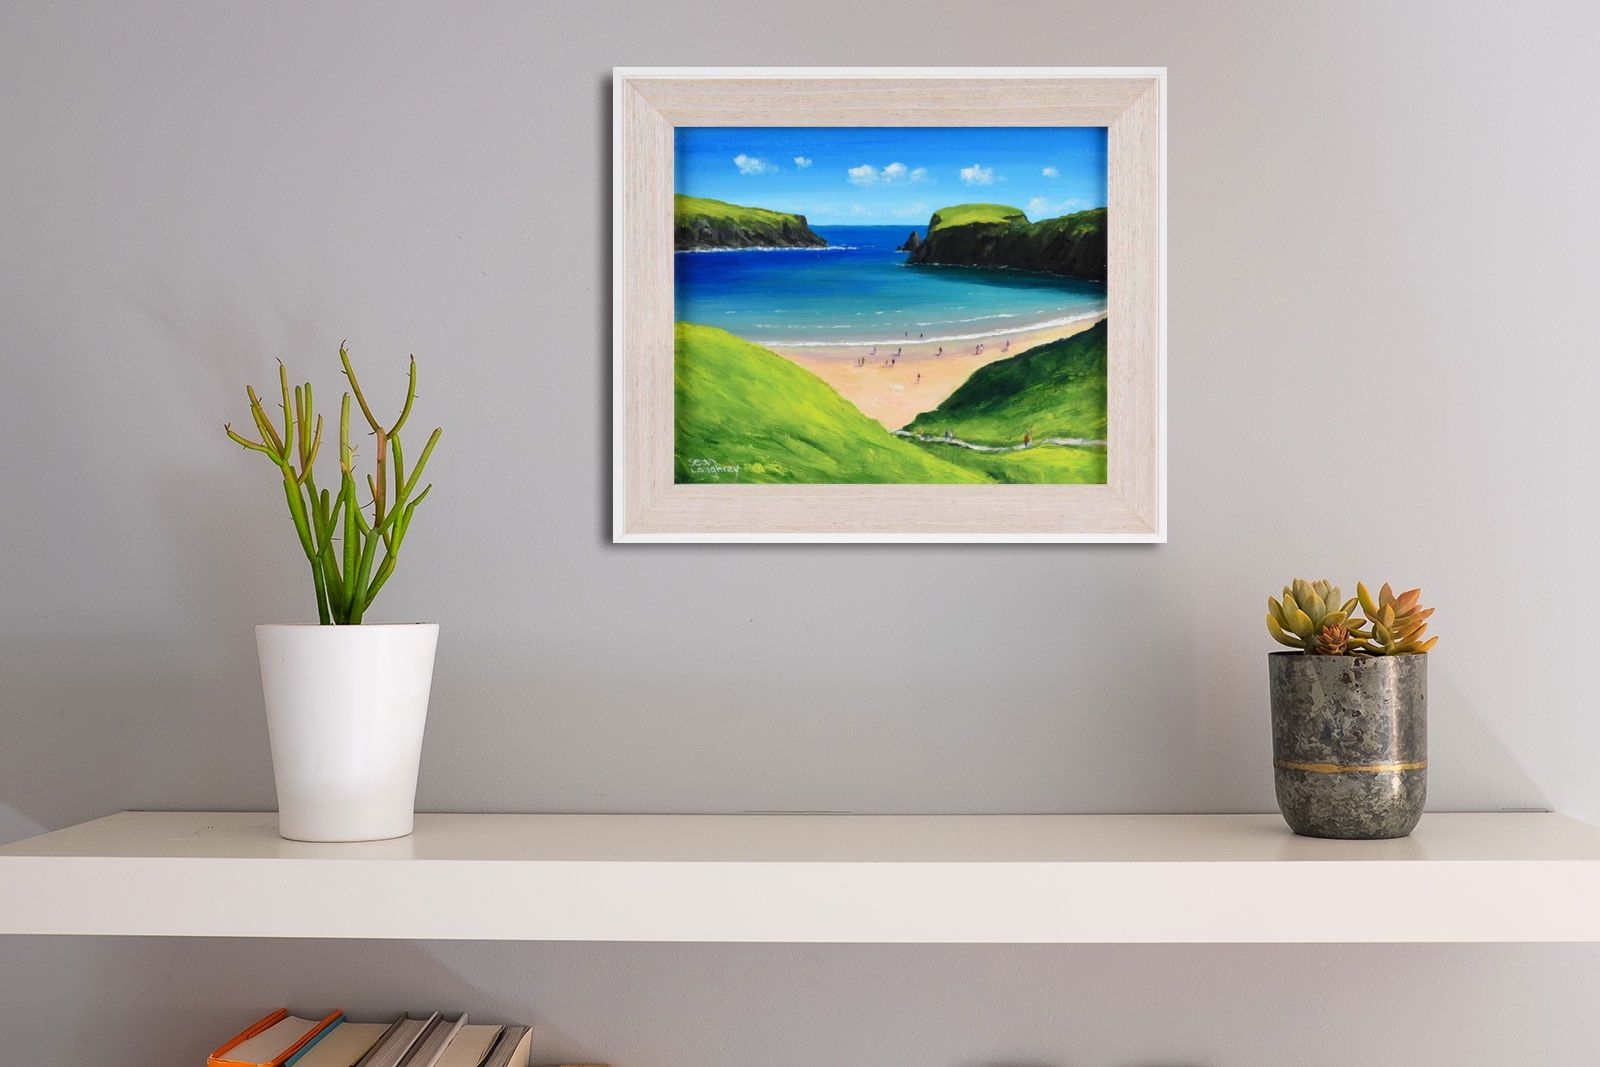 Artwork by Sean Loughrey, SILVER STRAND BEACH, DONEGAL, Made of OIL ON BOARD